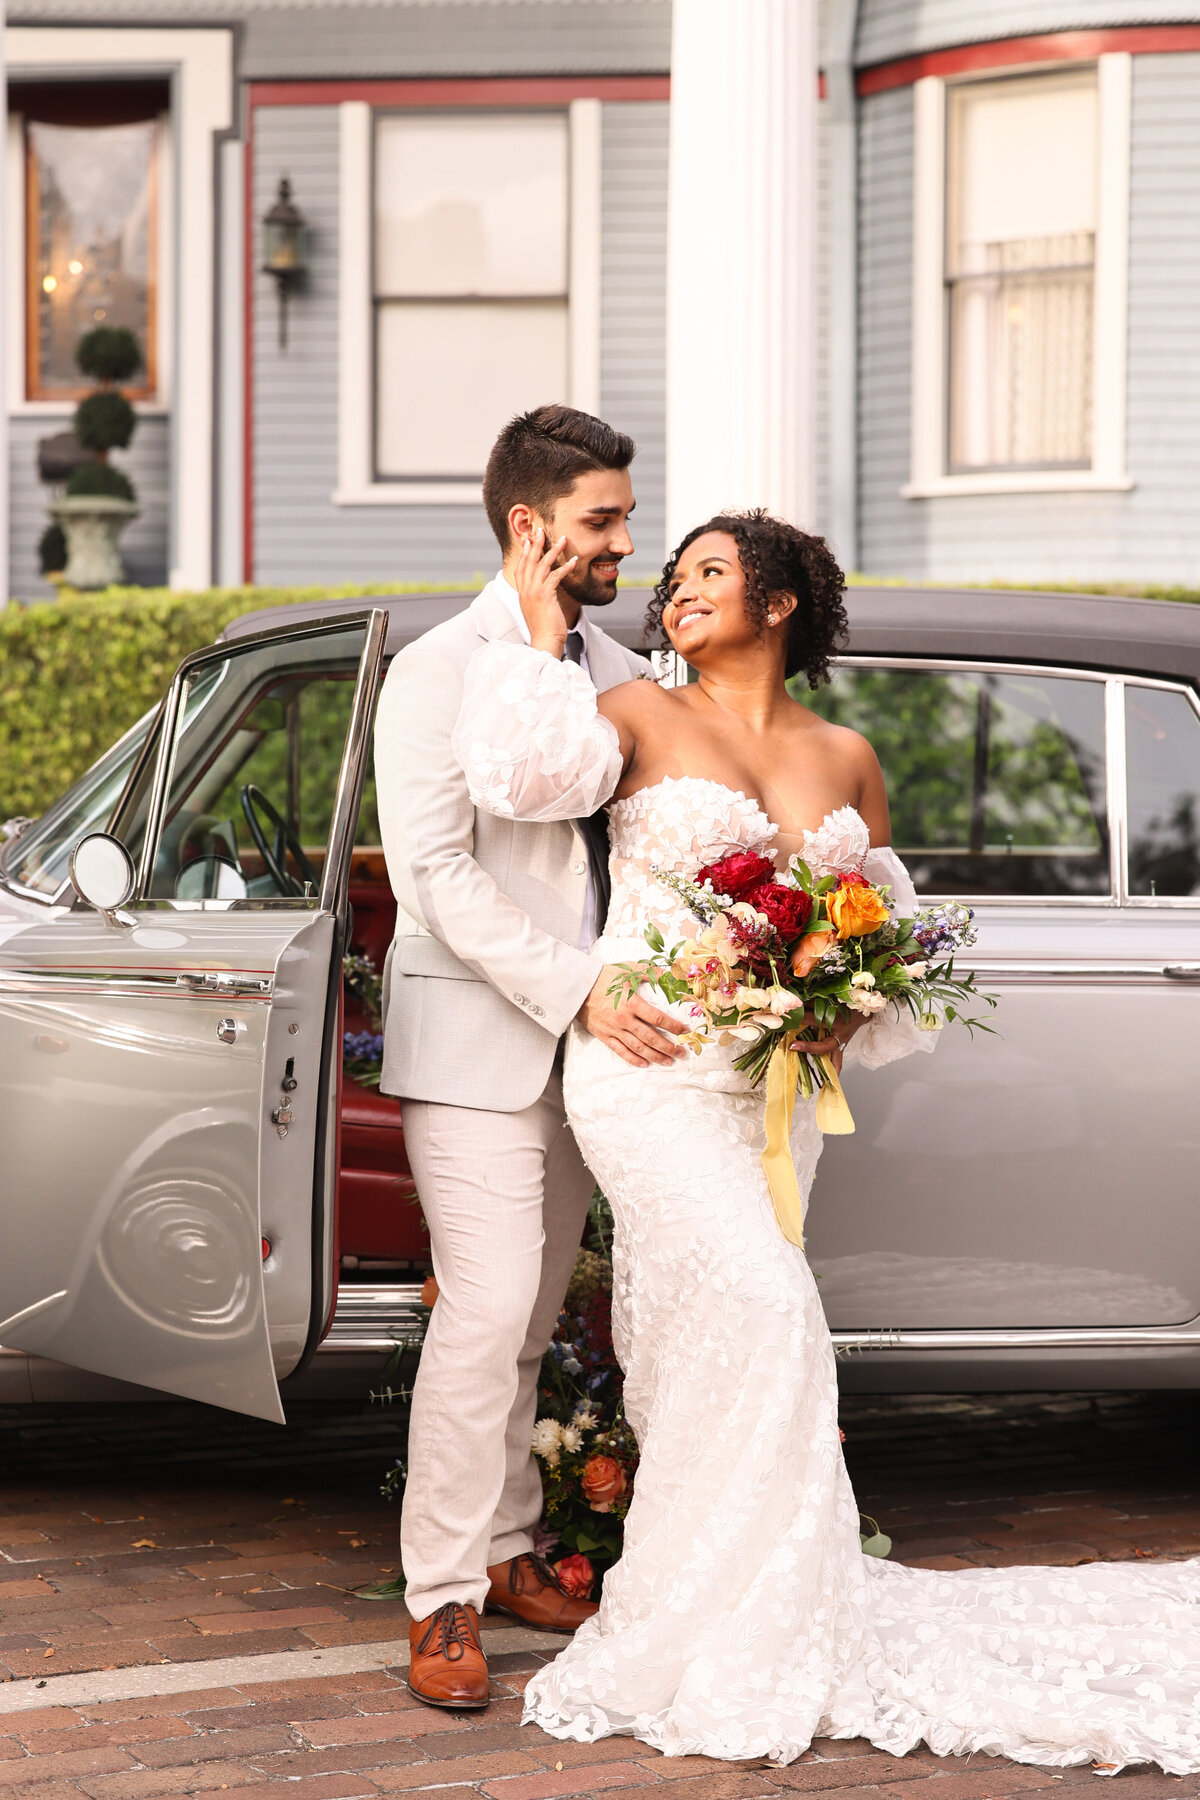 bride wearing lace dress and groom wearing  tan suit standing in front of gray vintage car